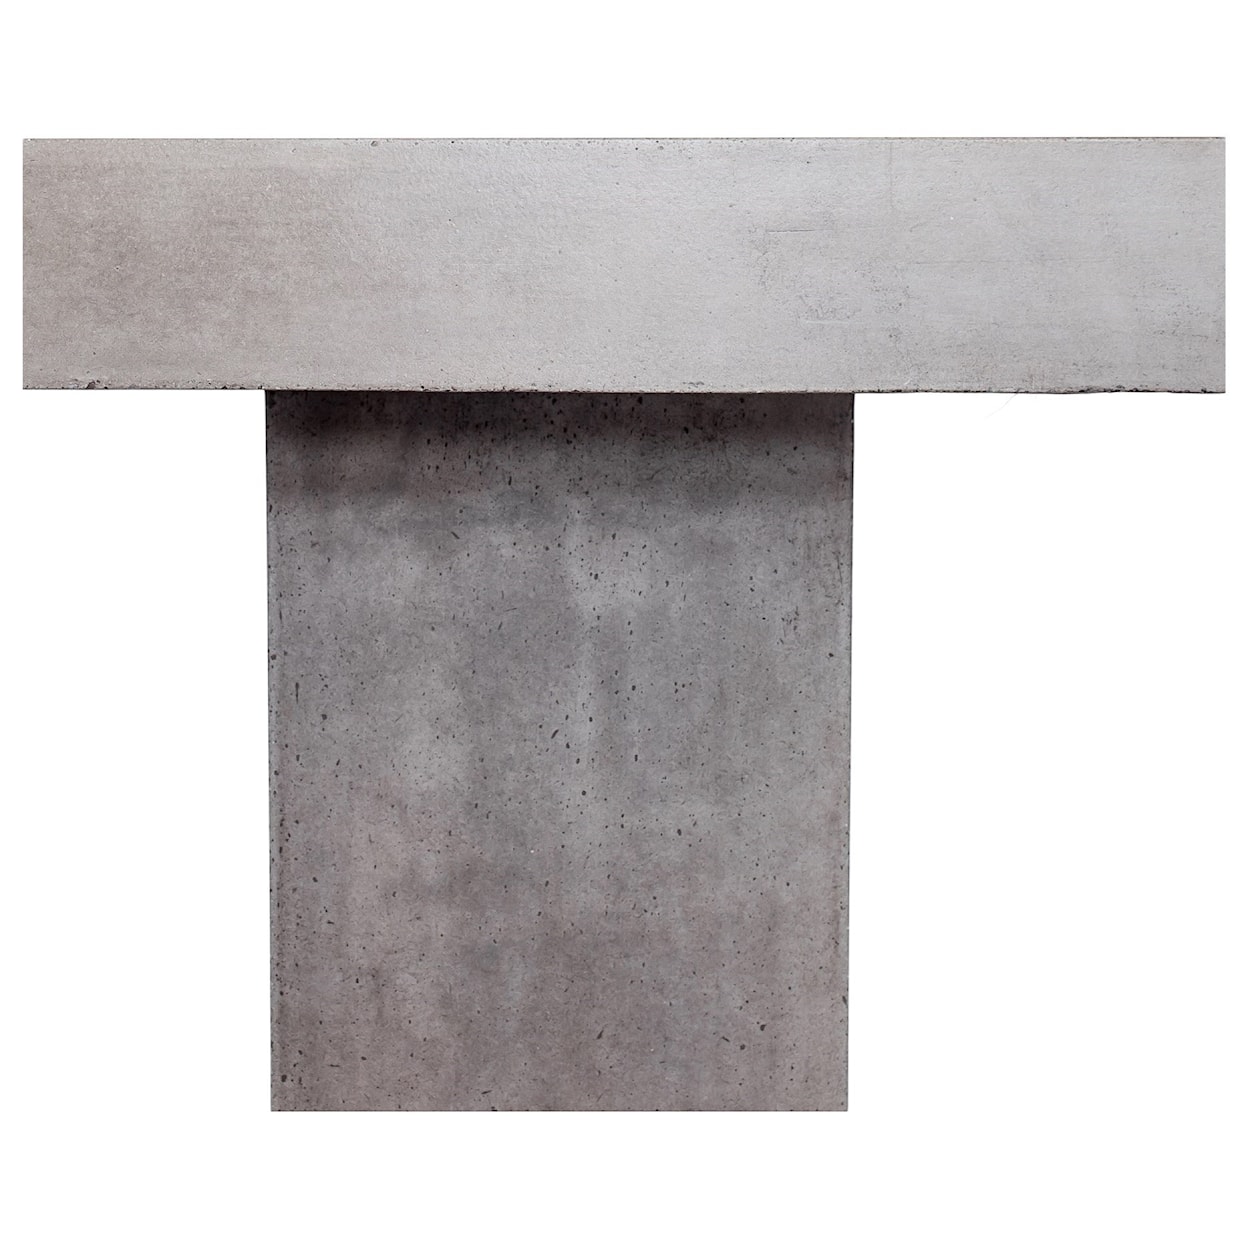 Moe's Home Collection Aurelius Concrete Outdoor Dining Table